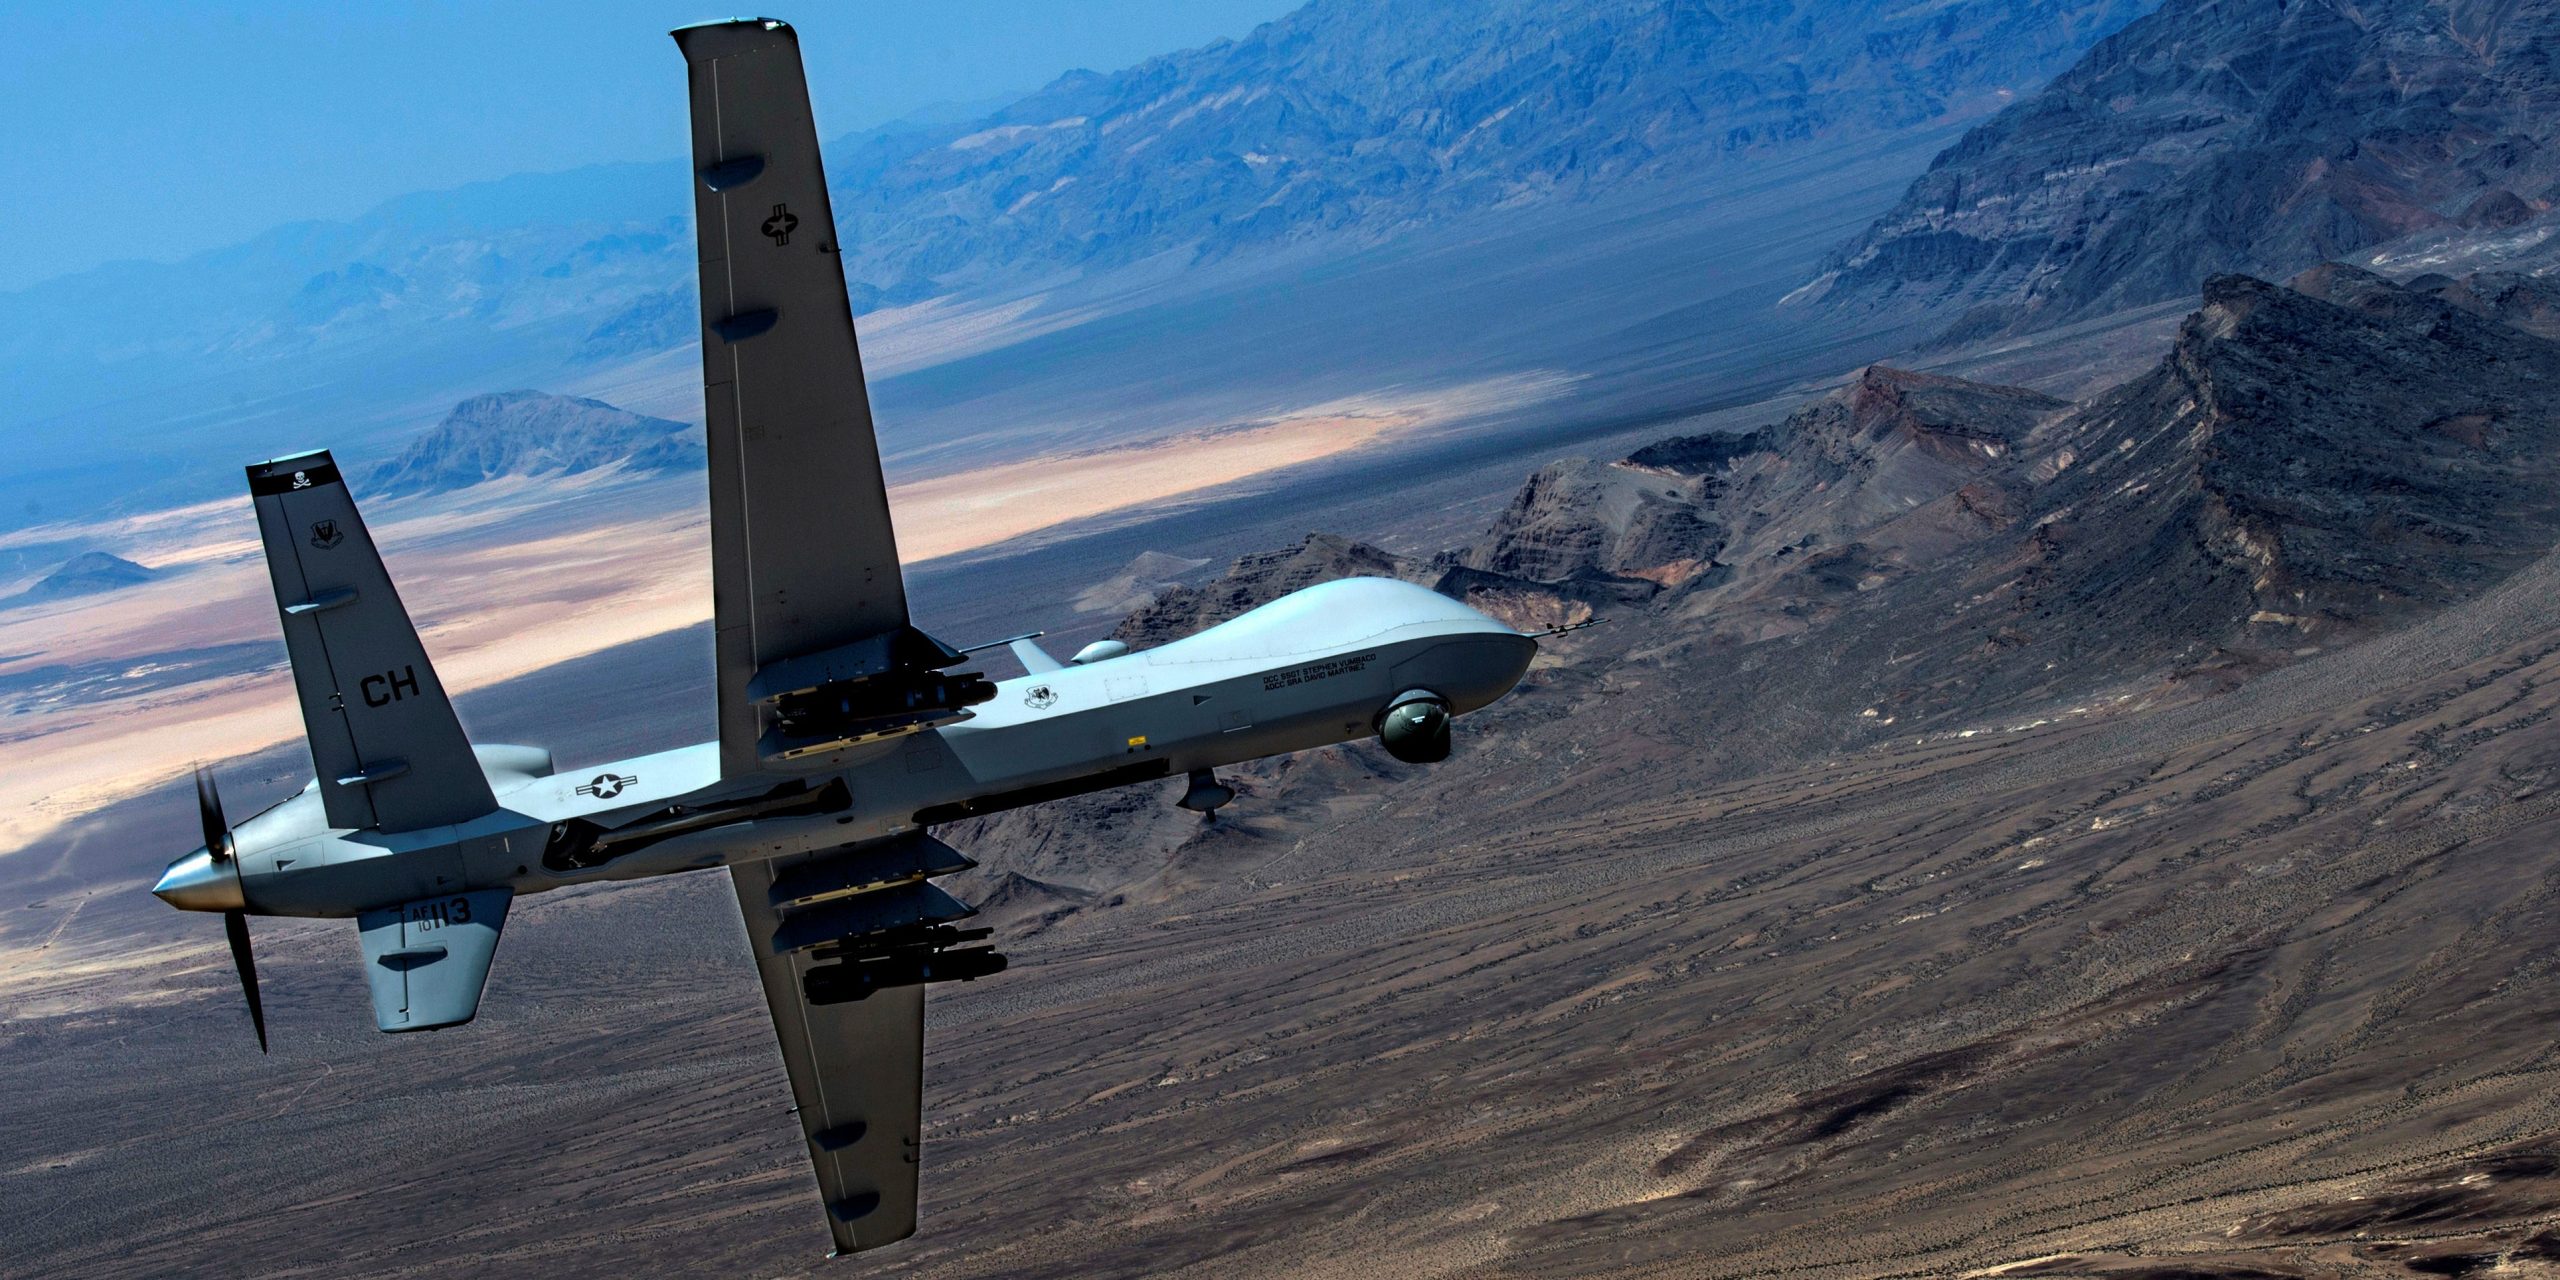 An MQ-9 Reaper remotely piloted drone aircraft performs aerial maneuvers over Creech Air Force Base